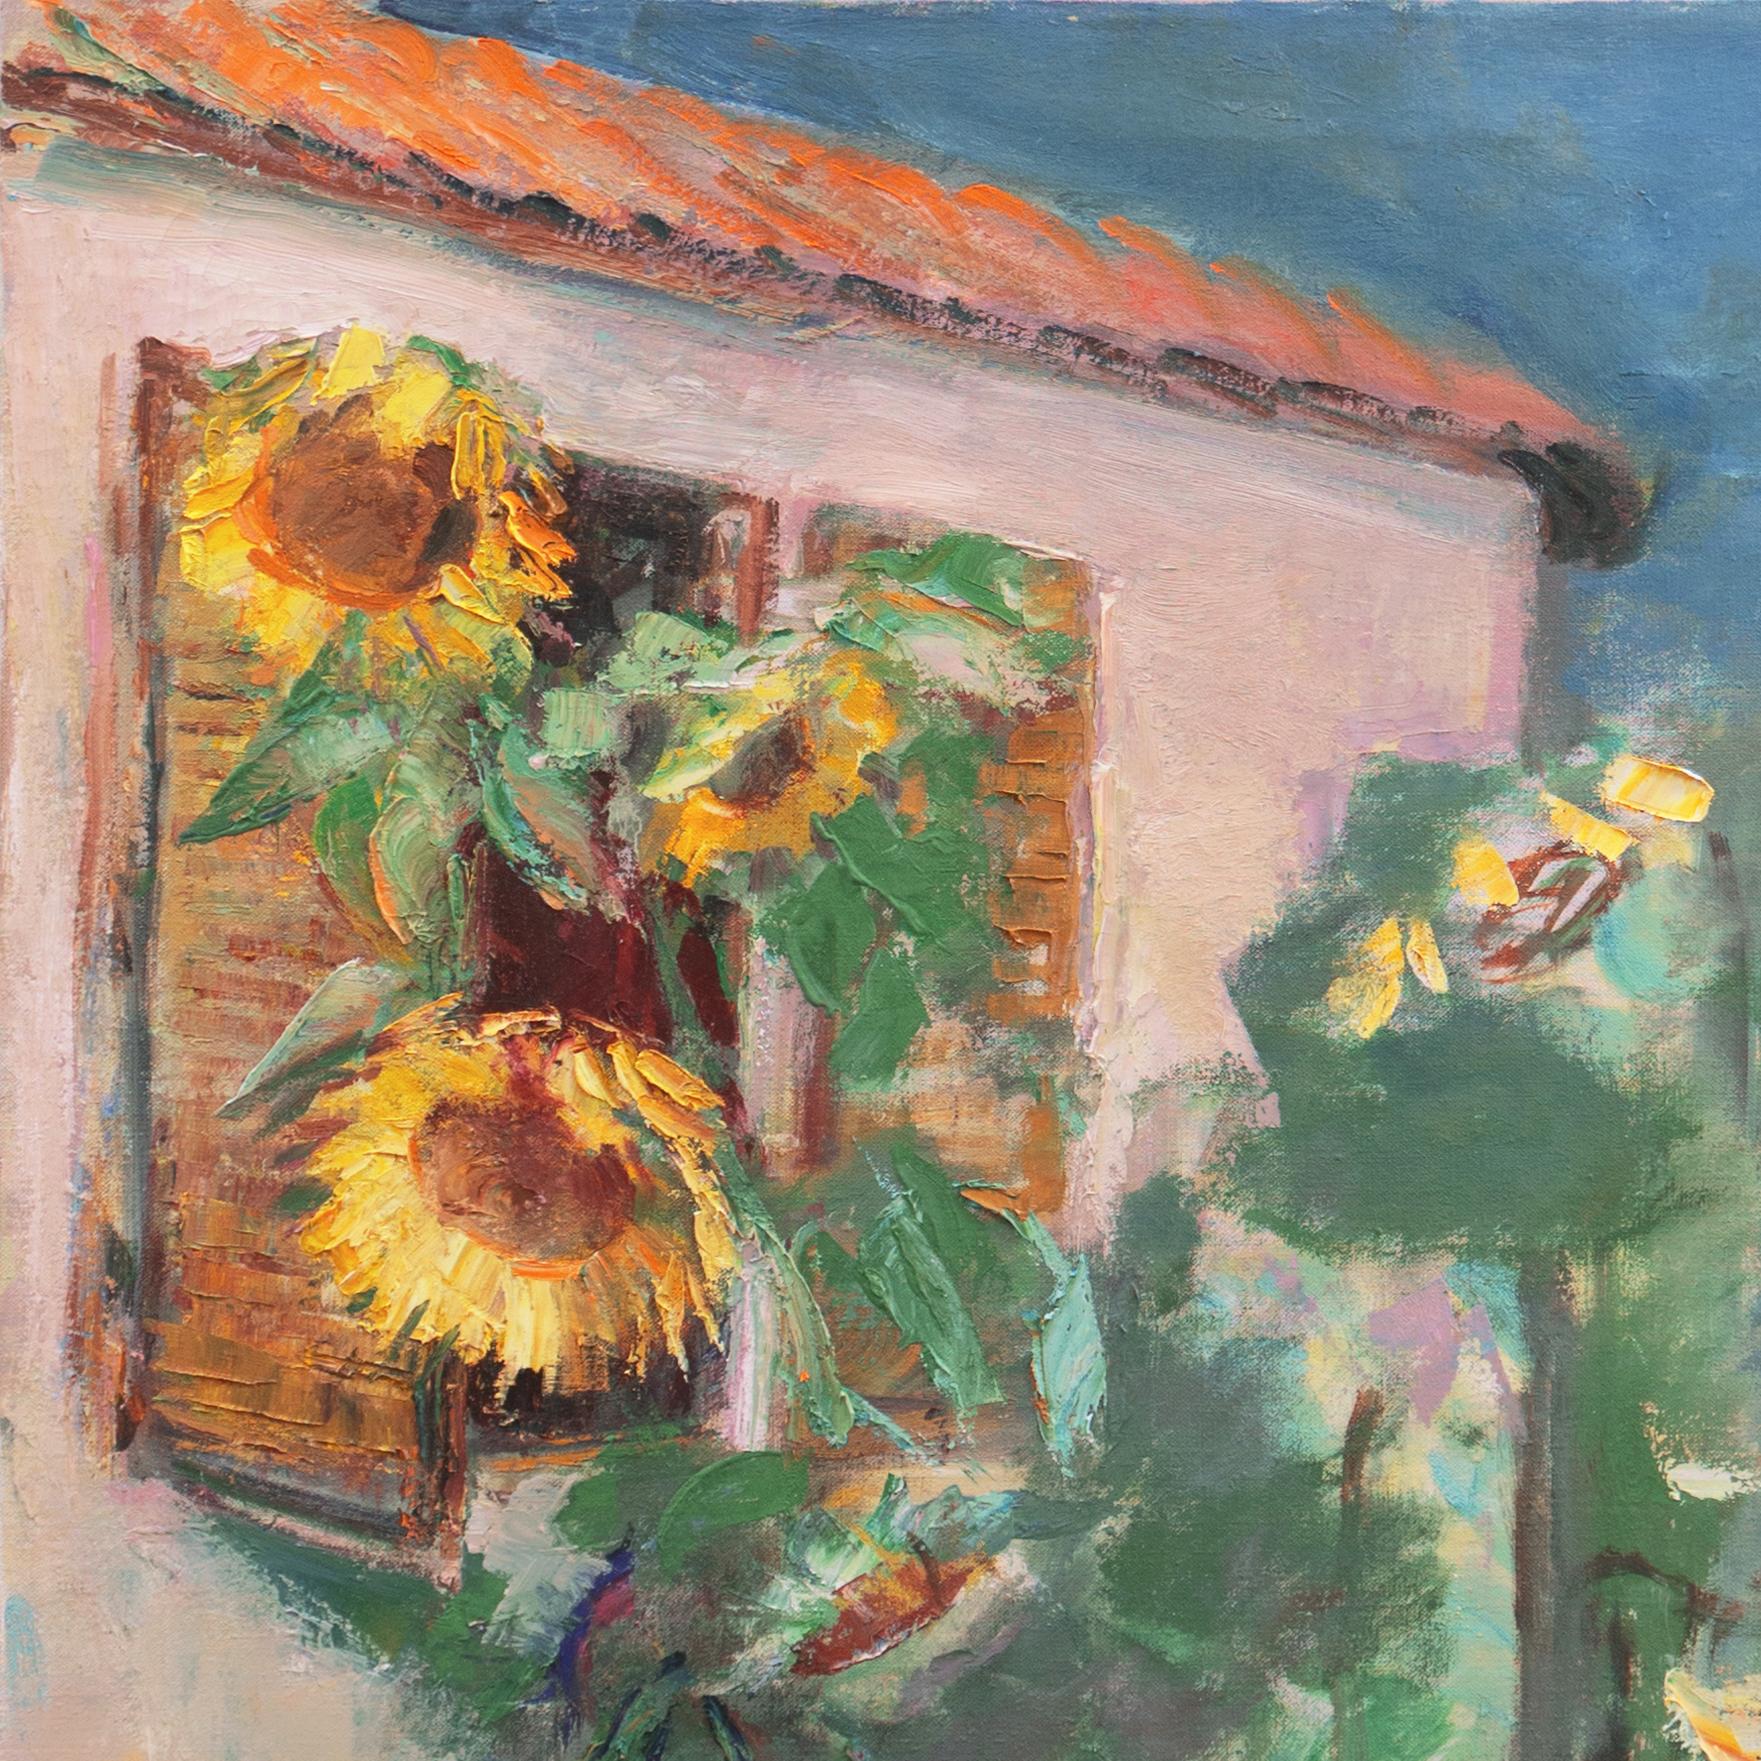 Initialed, twice, verso, on stretcher bar, 'M.v.R' (20th century) and painted circa 1975.

A bright oil painting showing a bed of vibrant sunflowers growing next to a red-tiled villa beneath a vivid blue sky.